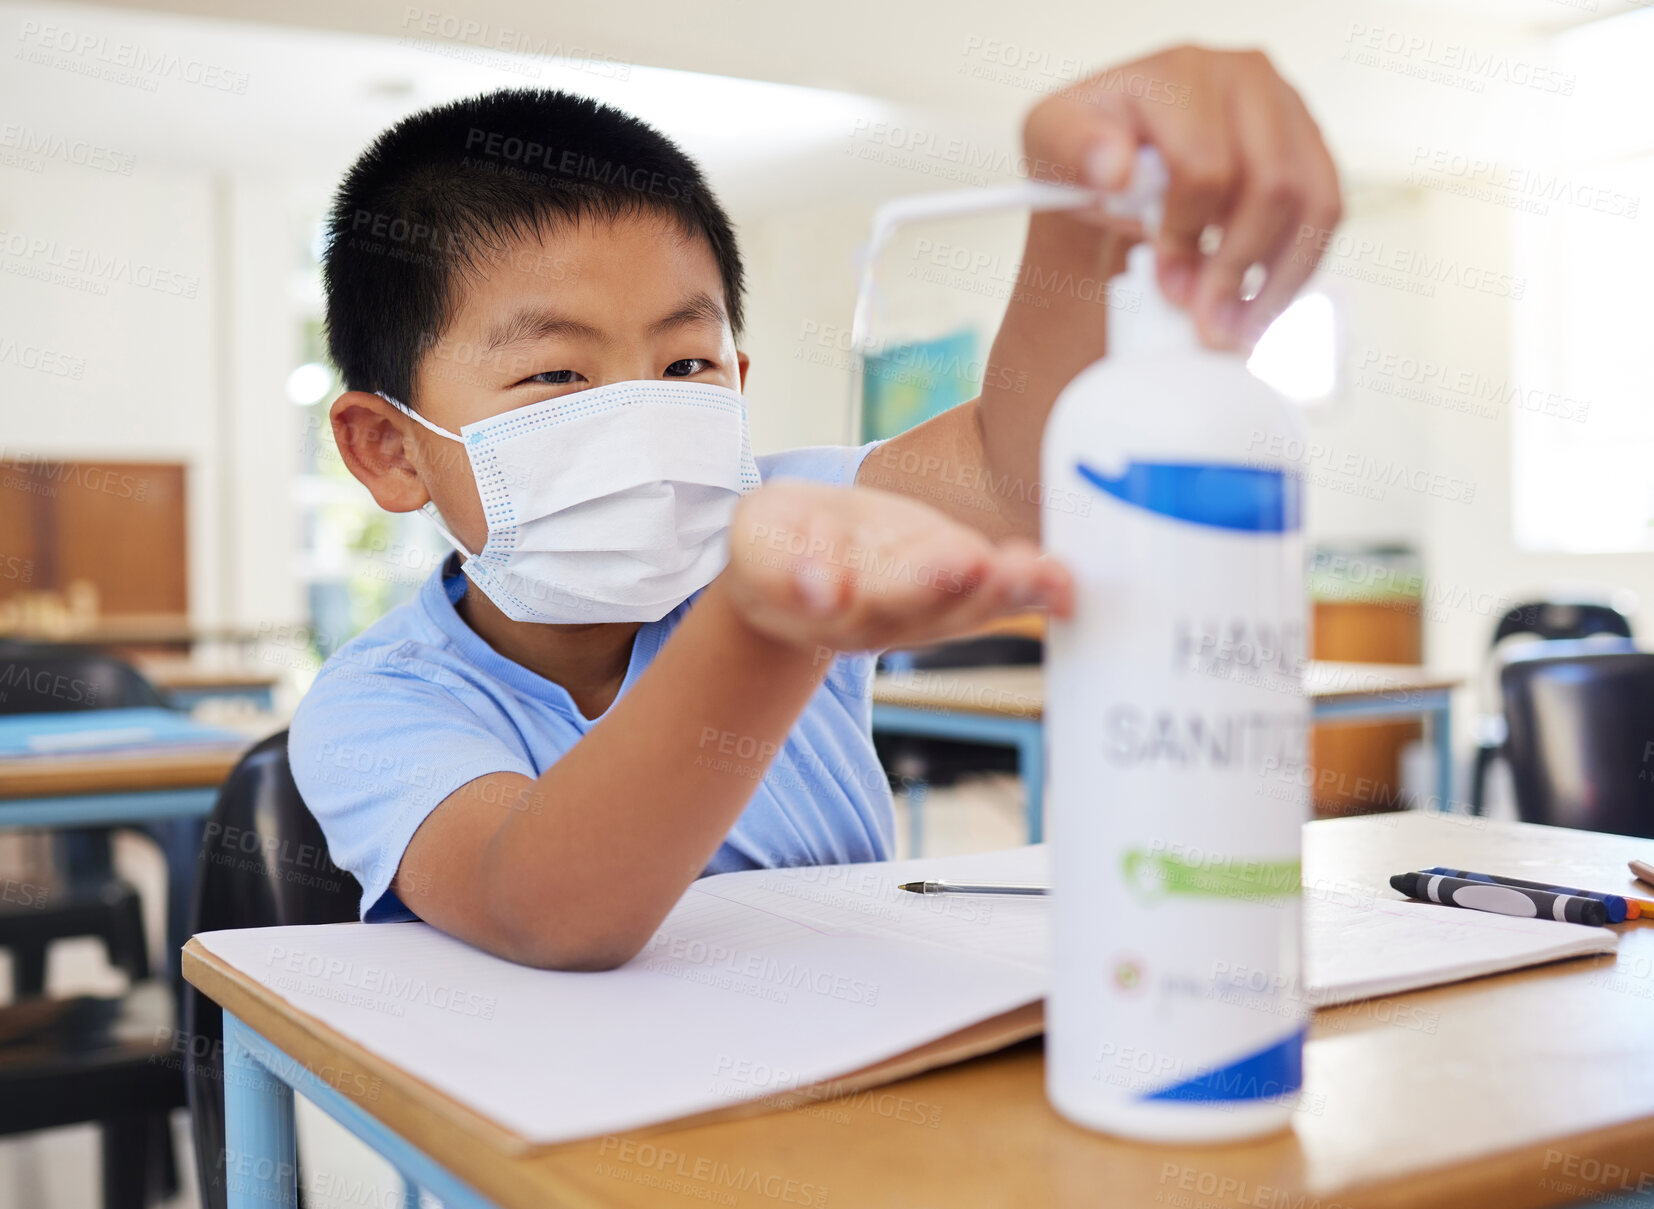 Buy stock photo Hygiene, safety and covid routine of a little boy using hand sanitizer at school. Young asian student with a mask practicing good health by cleaning his hands at his classroom desk in a pandemic